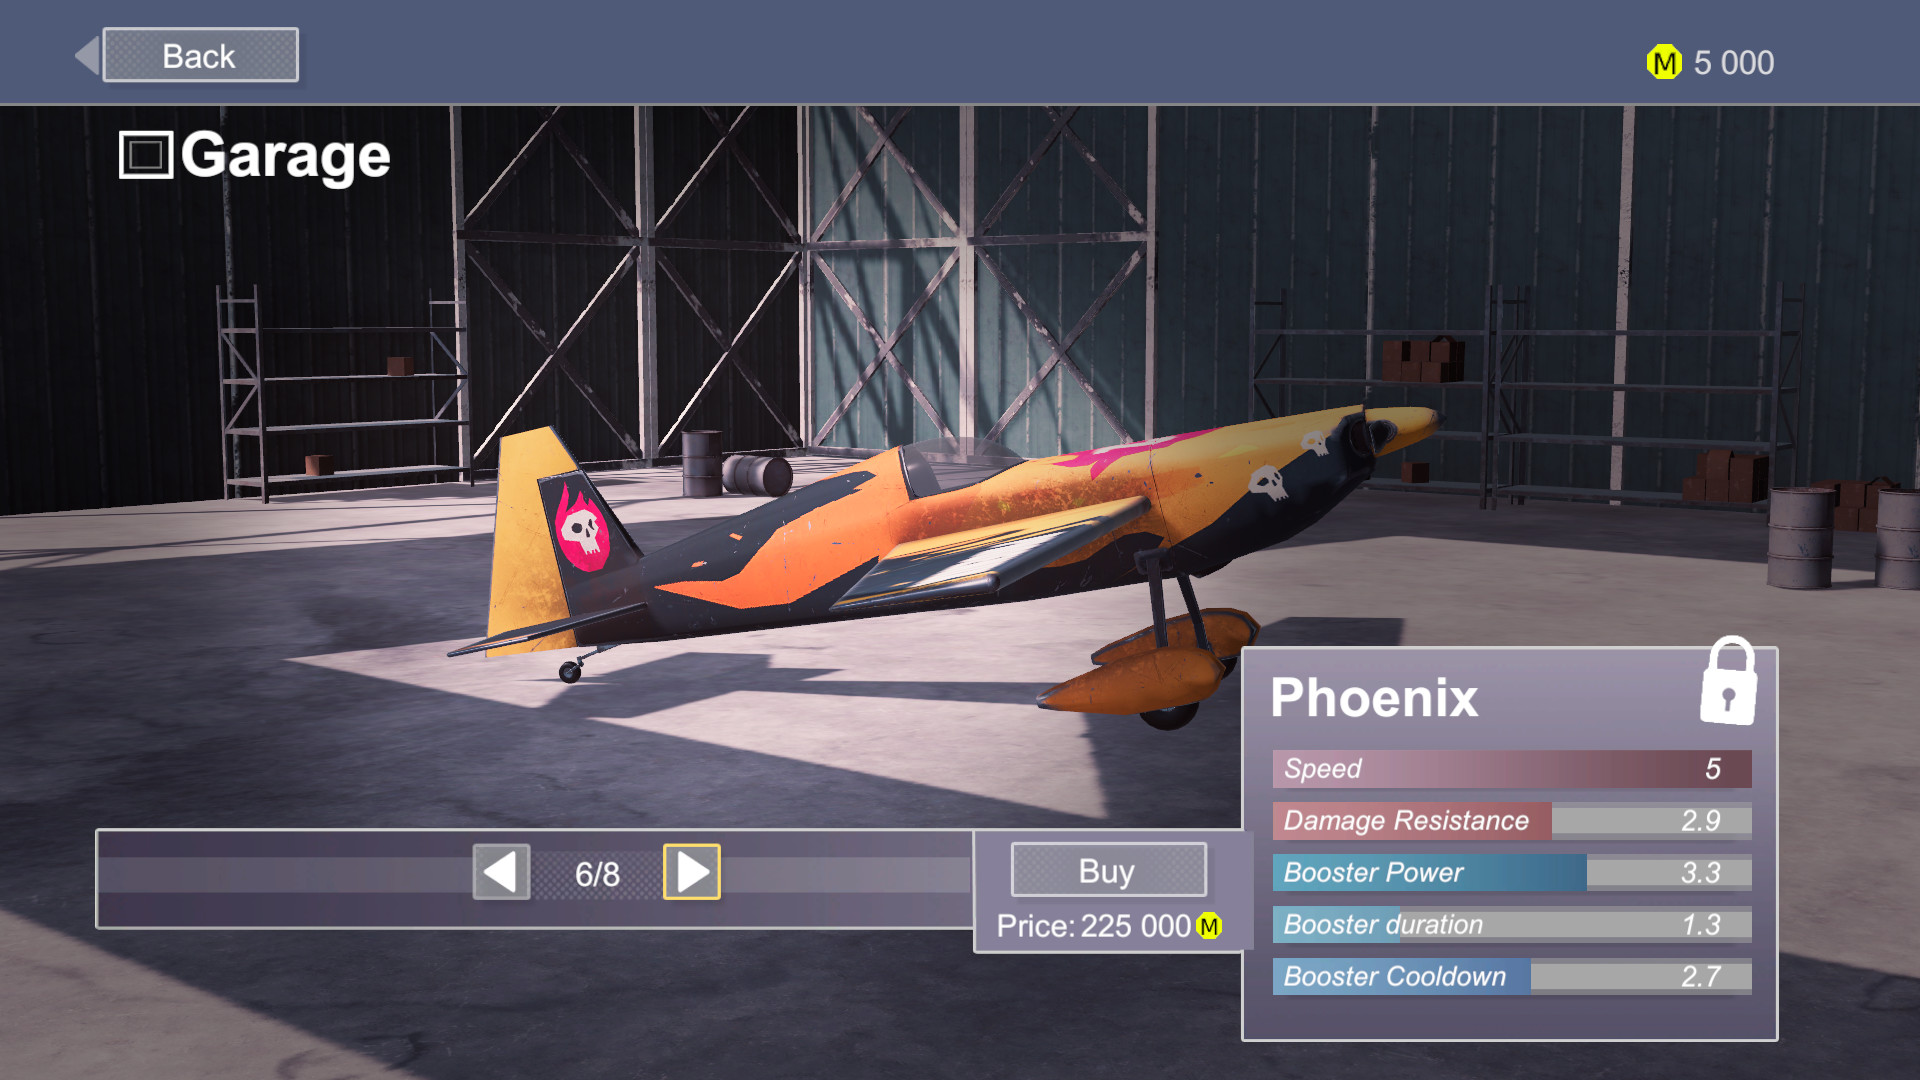 Update 0.1.9 Workshop is released! Come and customize your own fighter~ · 2D  Dogfight update for 7 August 2023 · SteamDB